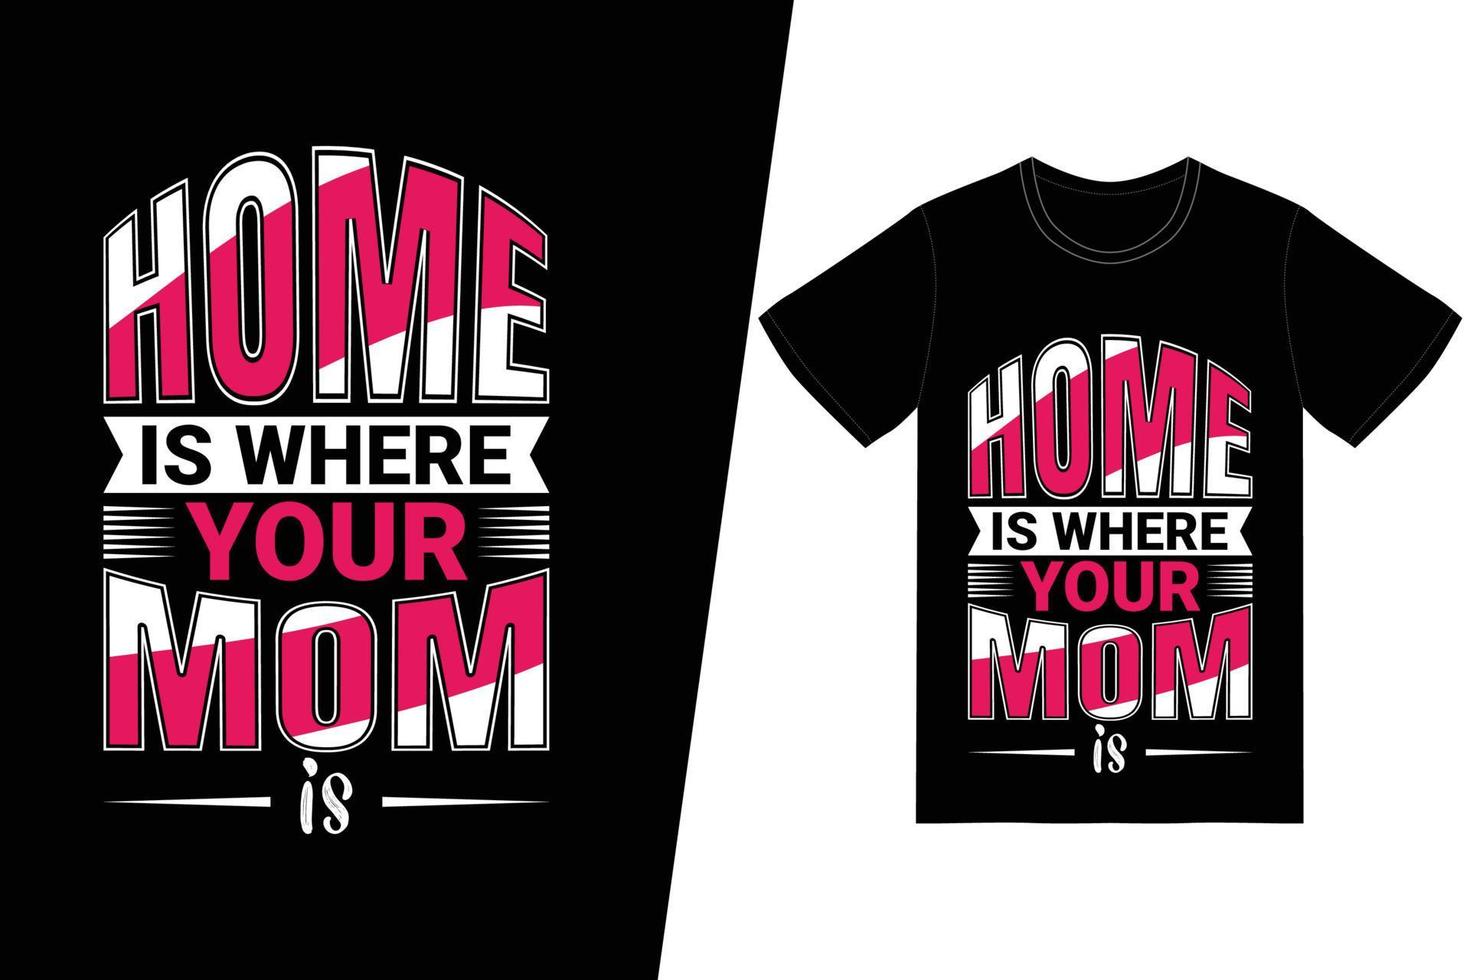 Home is where your mom is t-shirt design. Happy mothers day t-shirt design vector. For t-shirt print and other uses. vector